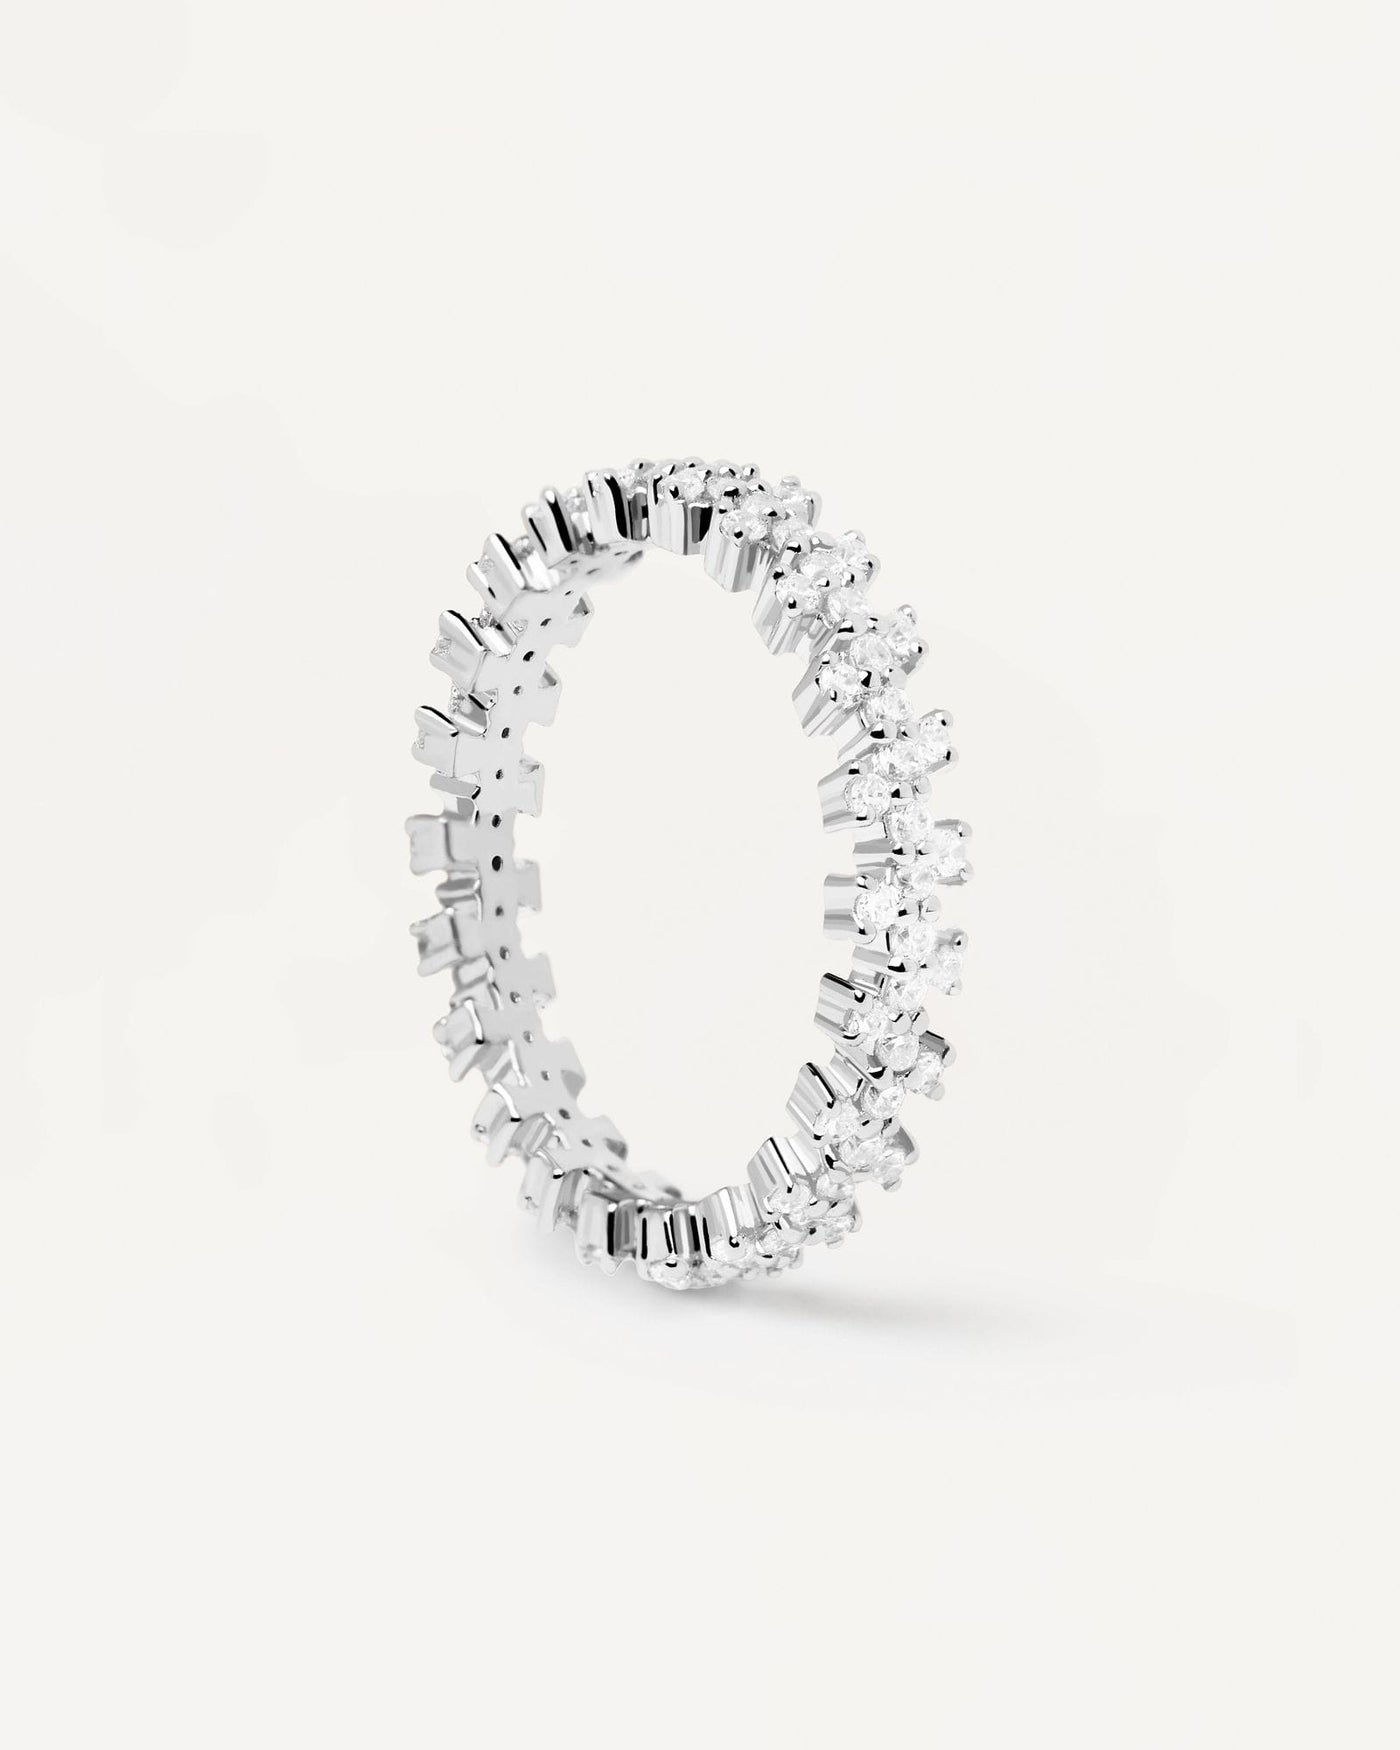 2024 Selection | Crown Silver Ring. Sterling silver eternity ring with crown shape. Get the latest arrival from PDPAOLA. Place your order safely and get this Best Seller. Free Shipping.